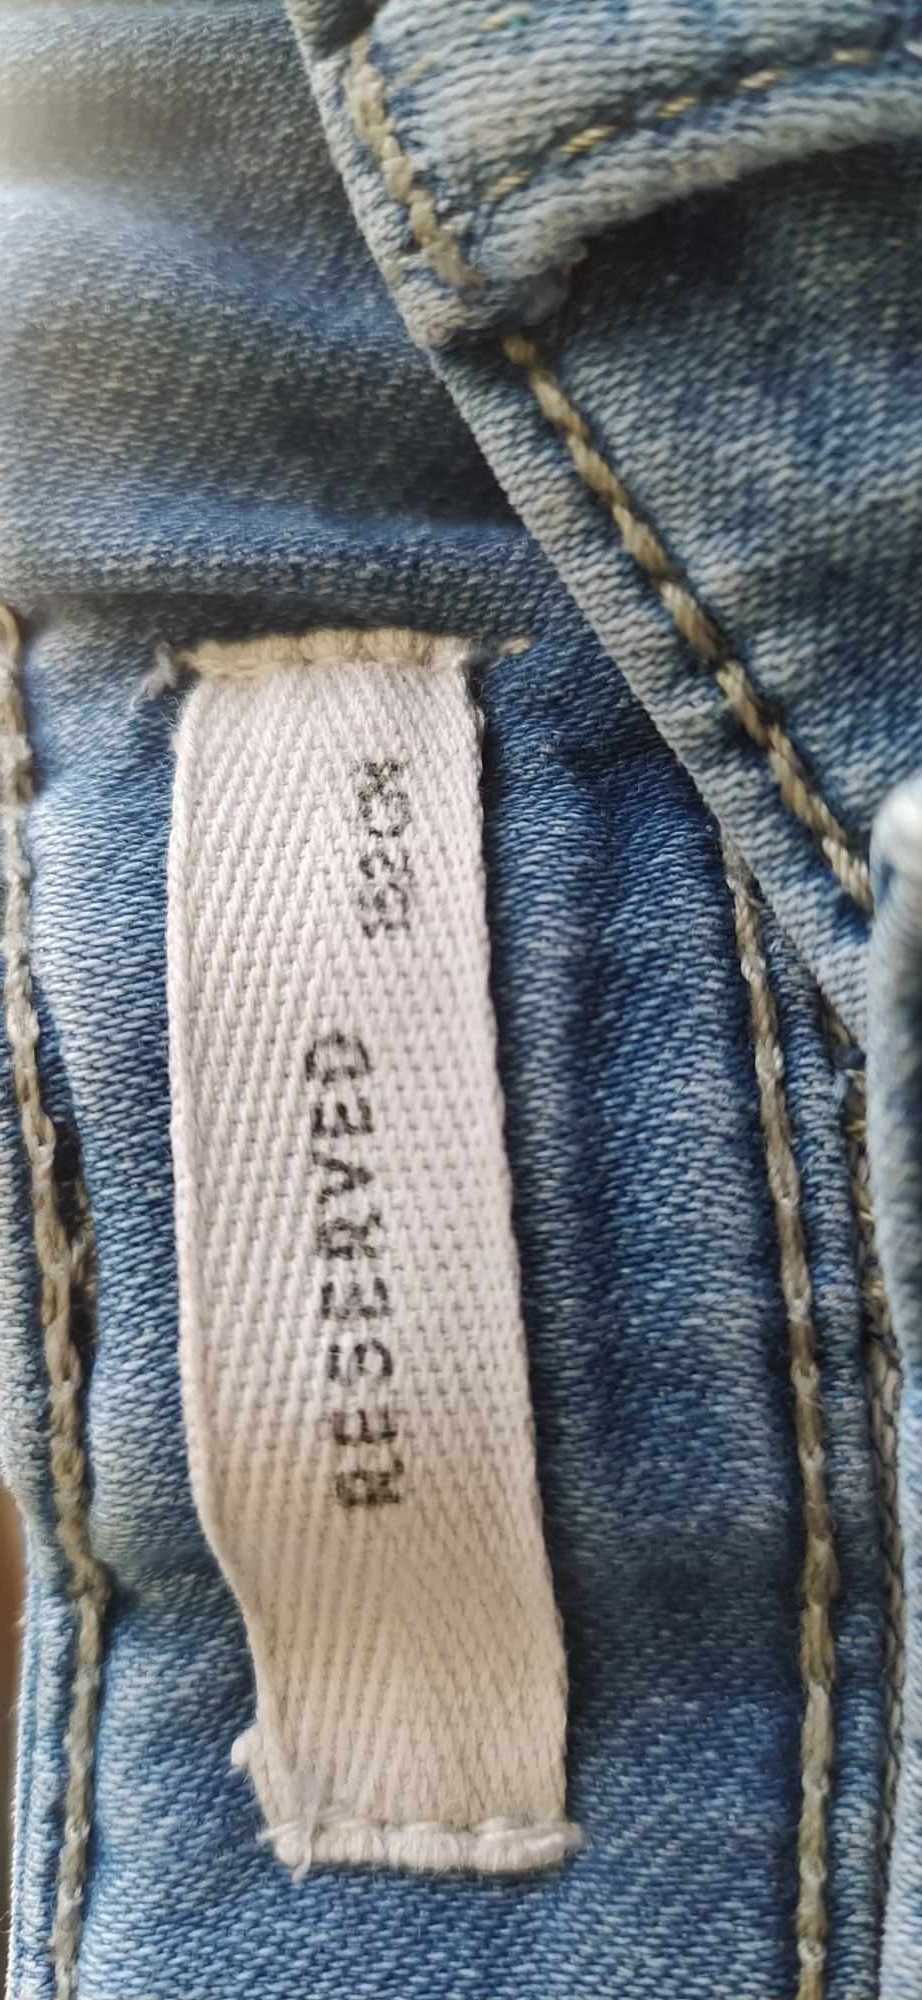 jeans_reserved_152